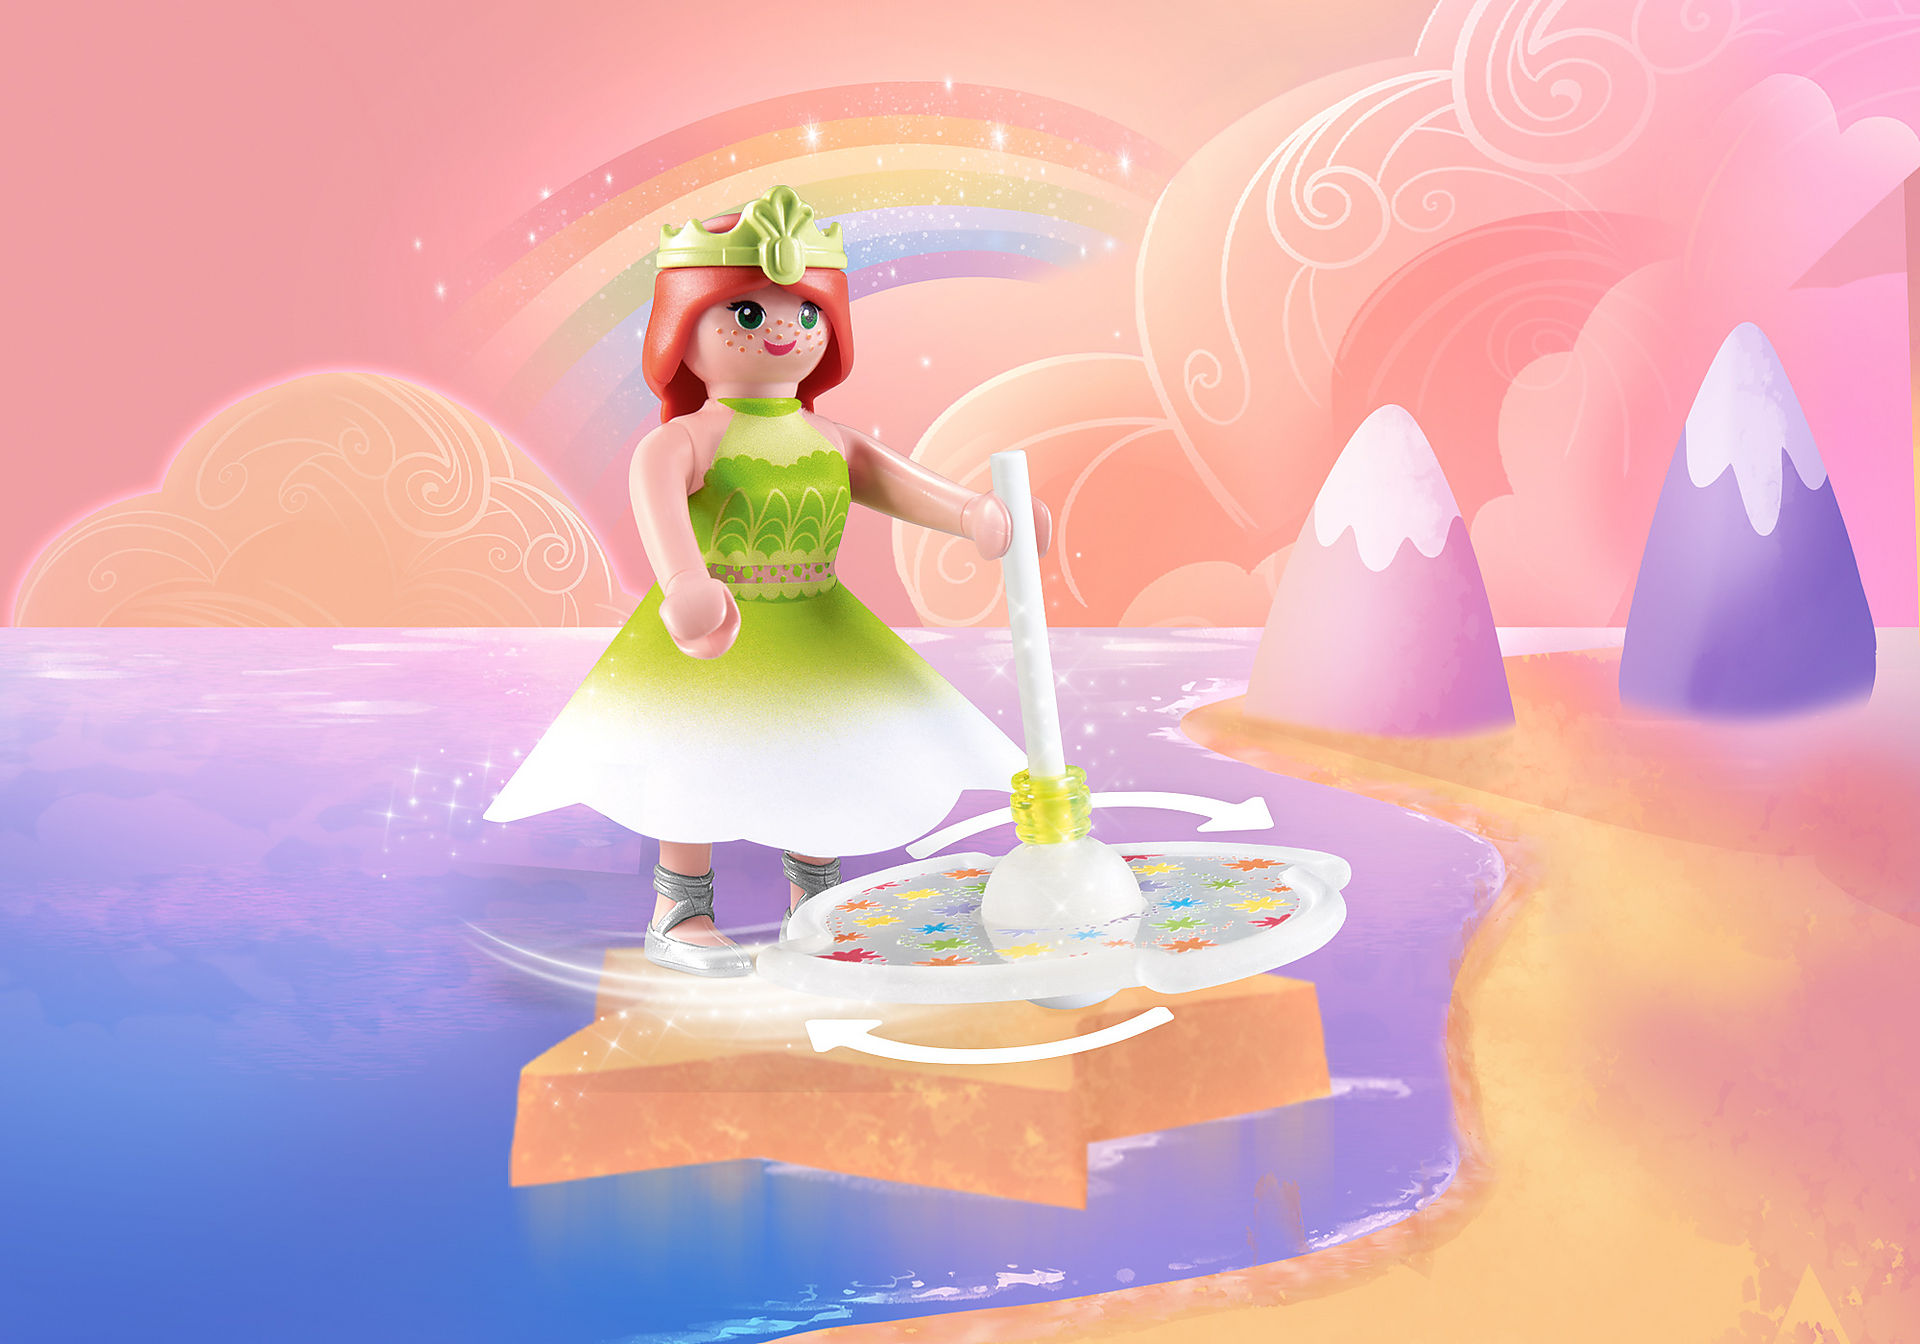 71364 Rainbow Spinning Top with Princess zoom image1